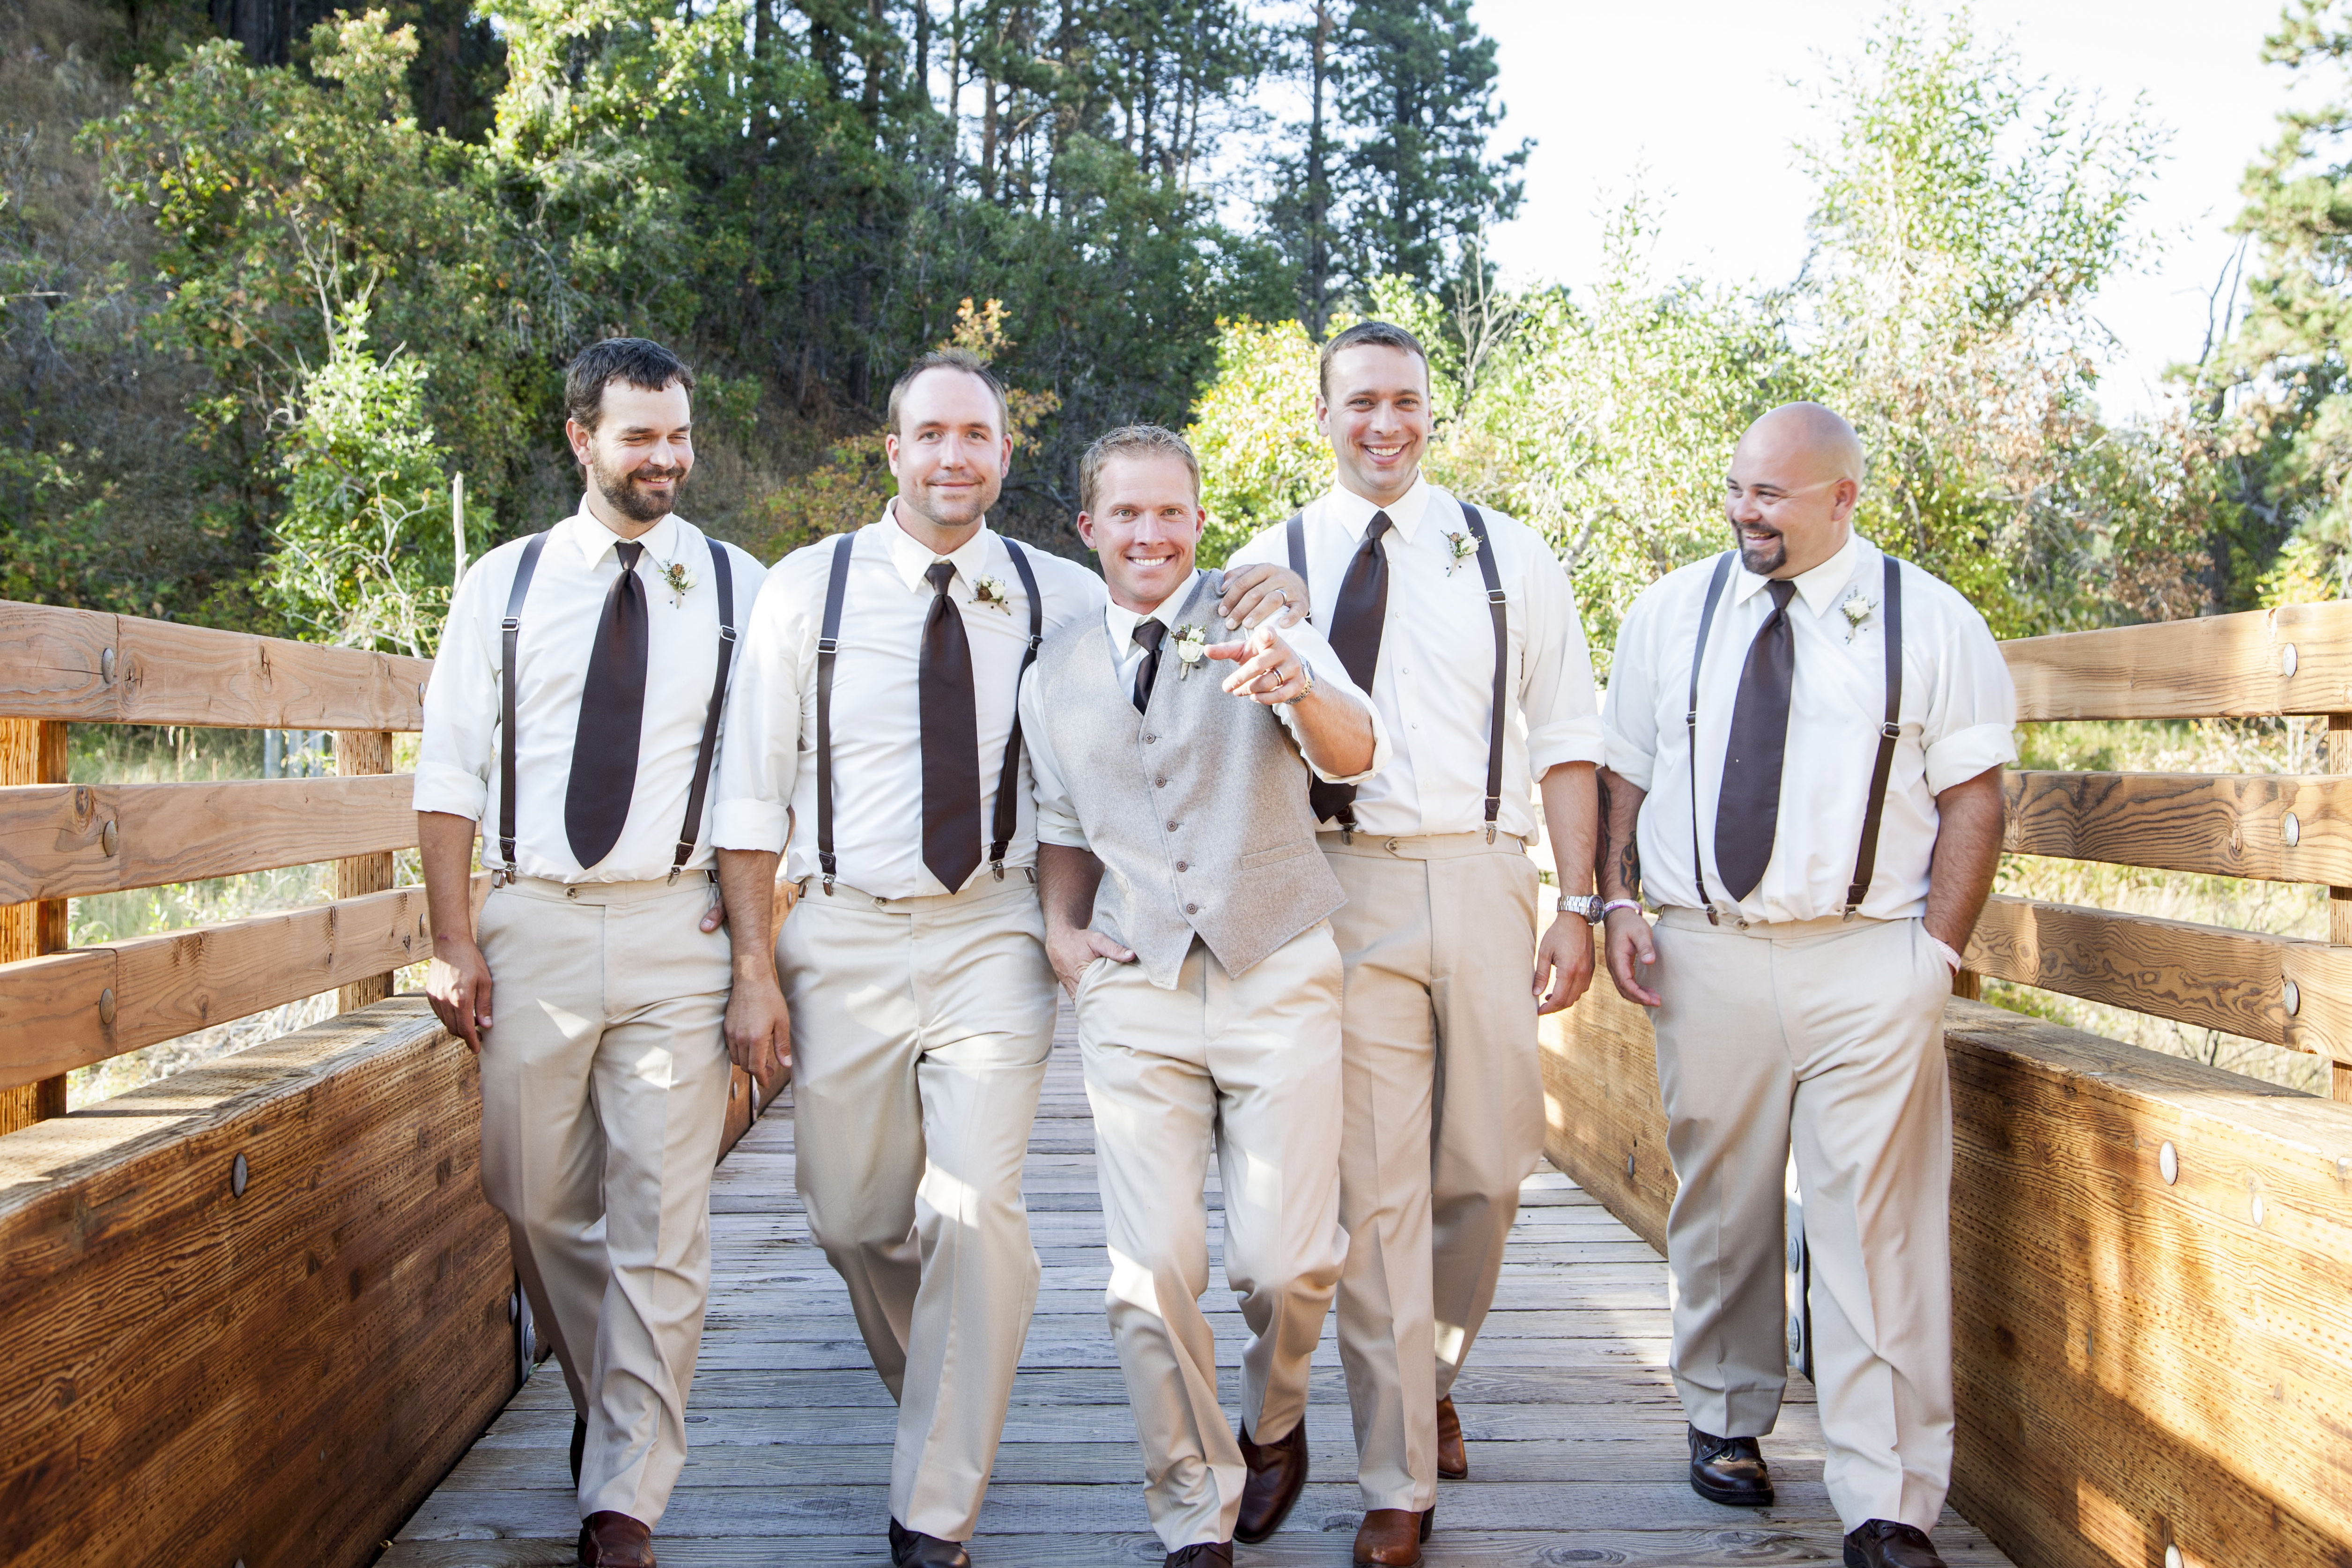 Why You Want to Wear Suspenders to Your Wedding